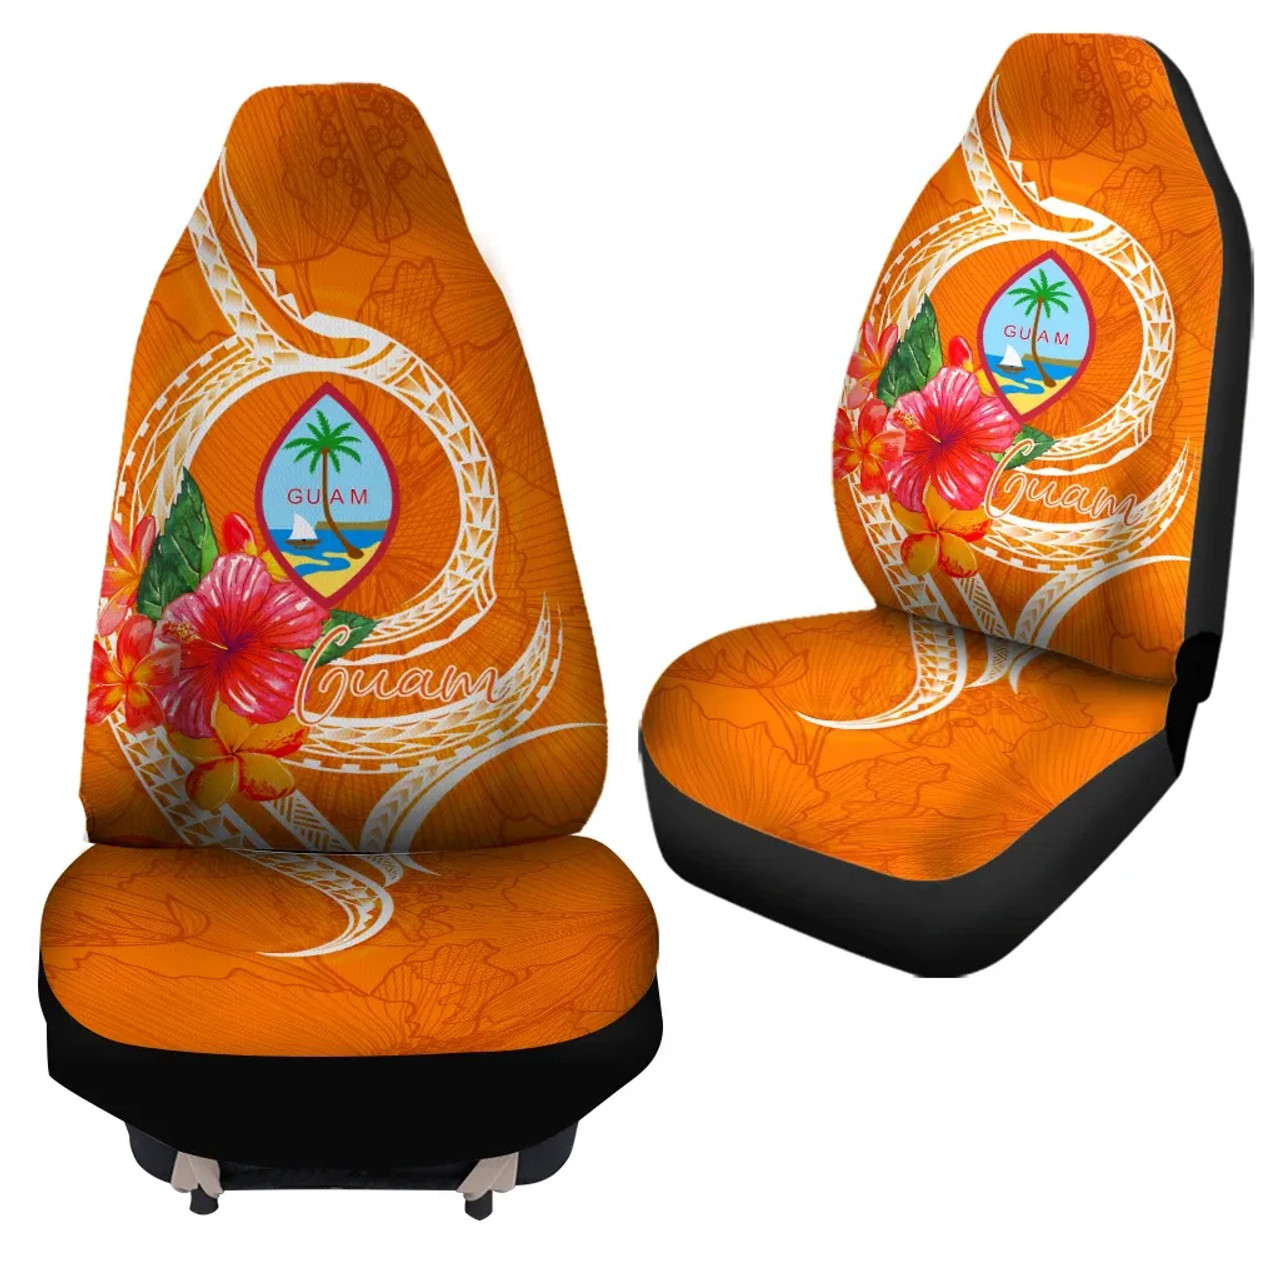 Guam Polynesian Car Seat Covers - Orange Floral With Seal